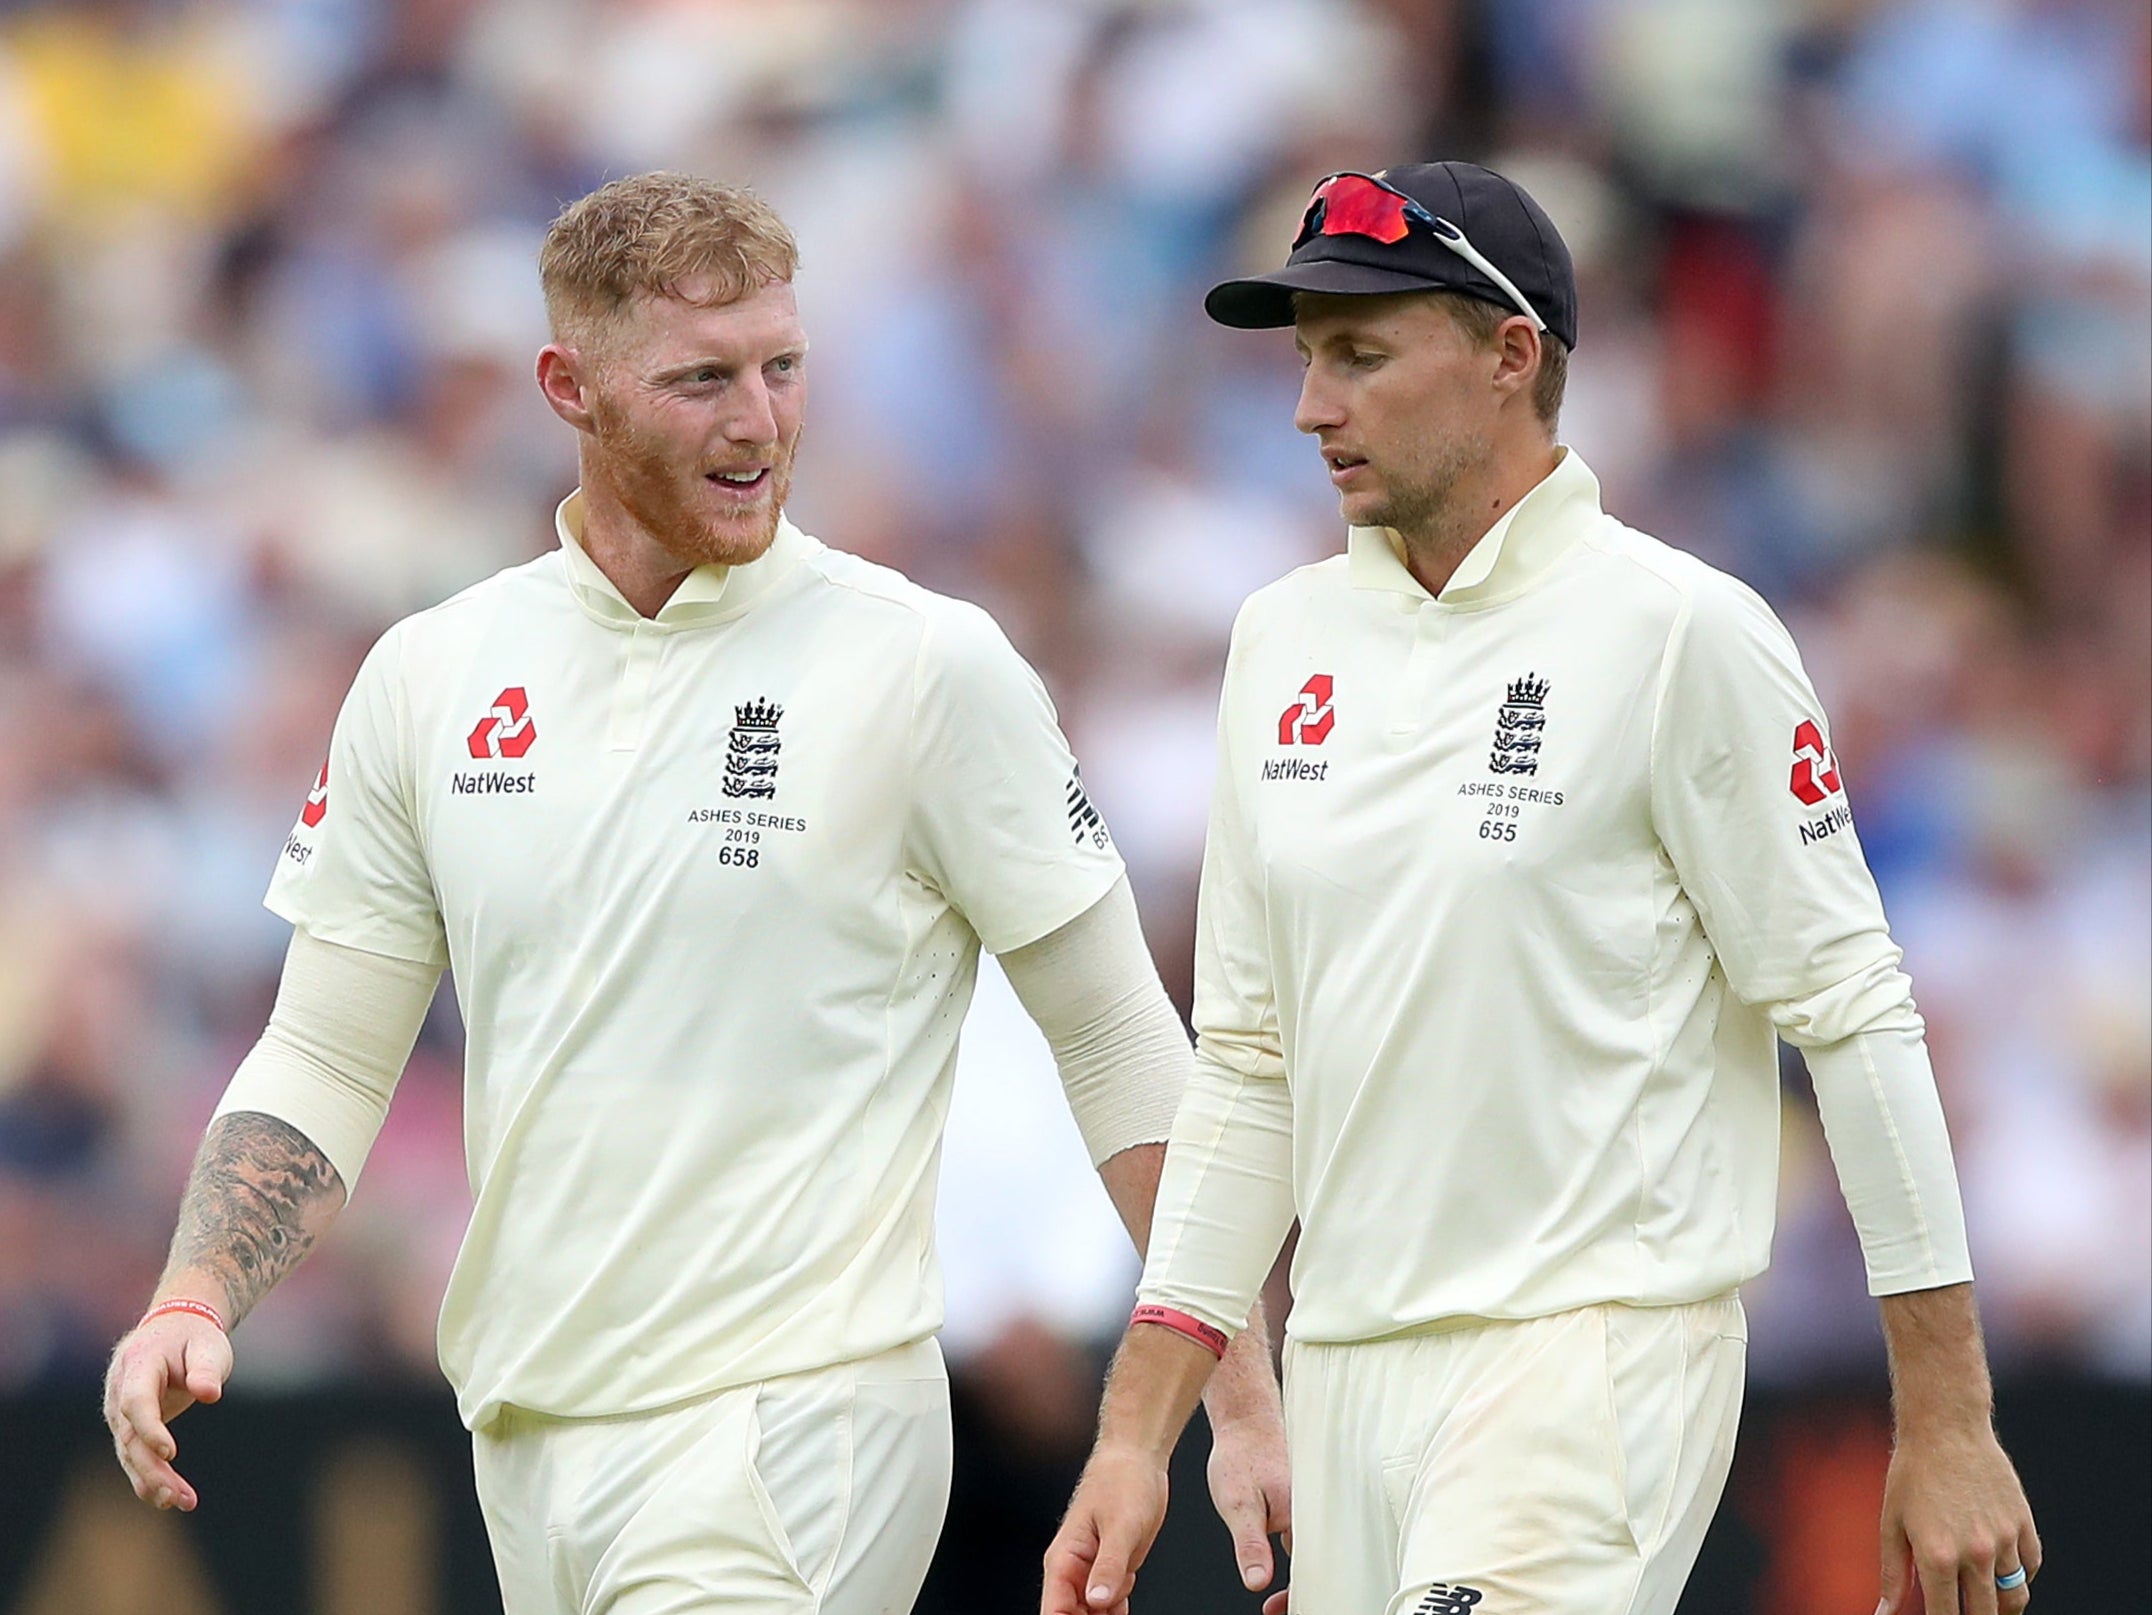 Joe Root (right) is feeling for his friend and team-mate Ben Stokes (left) (Nick Potts/PA)